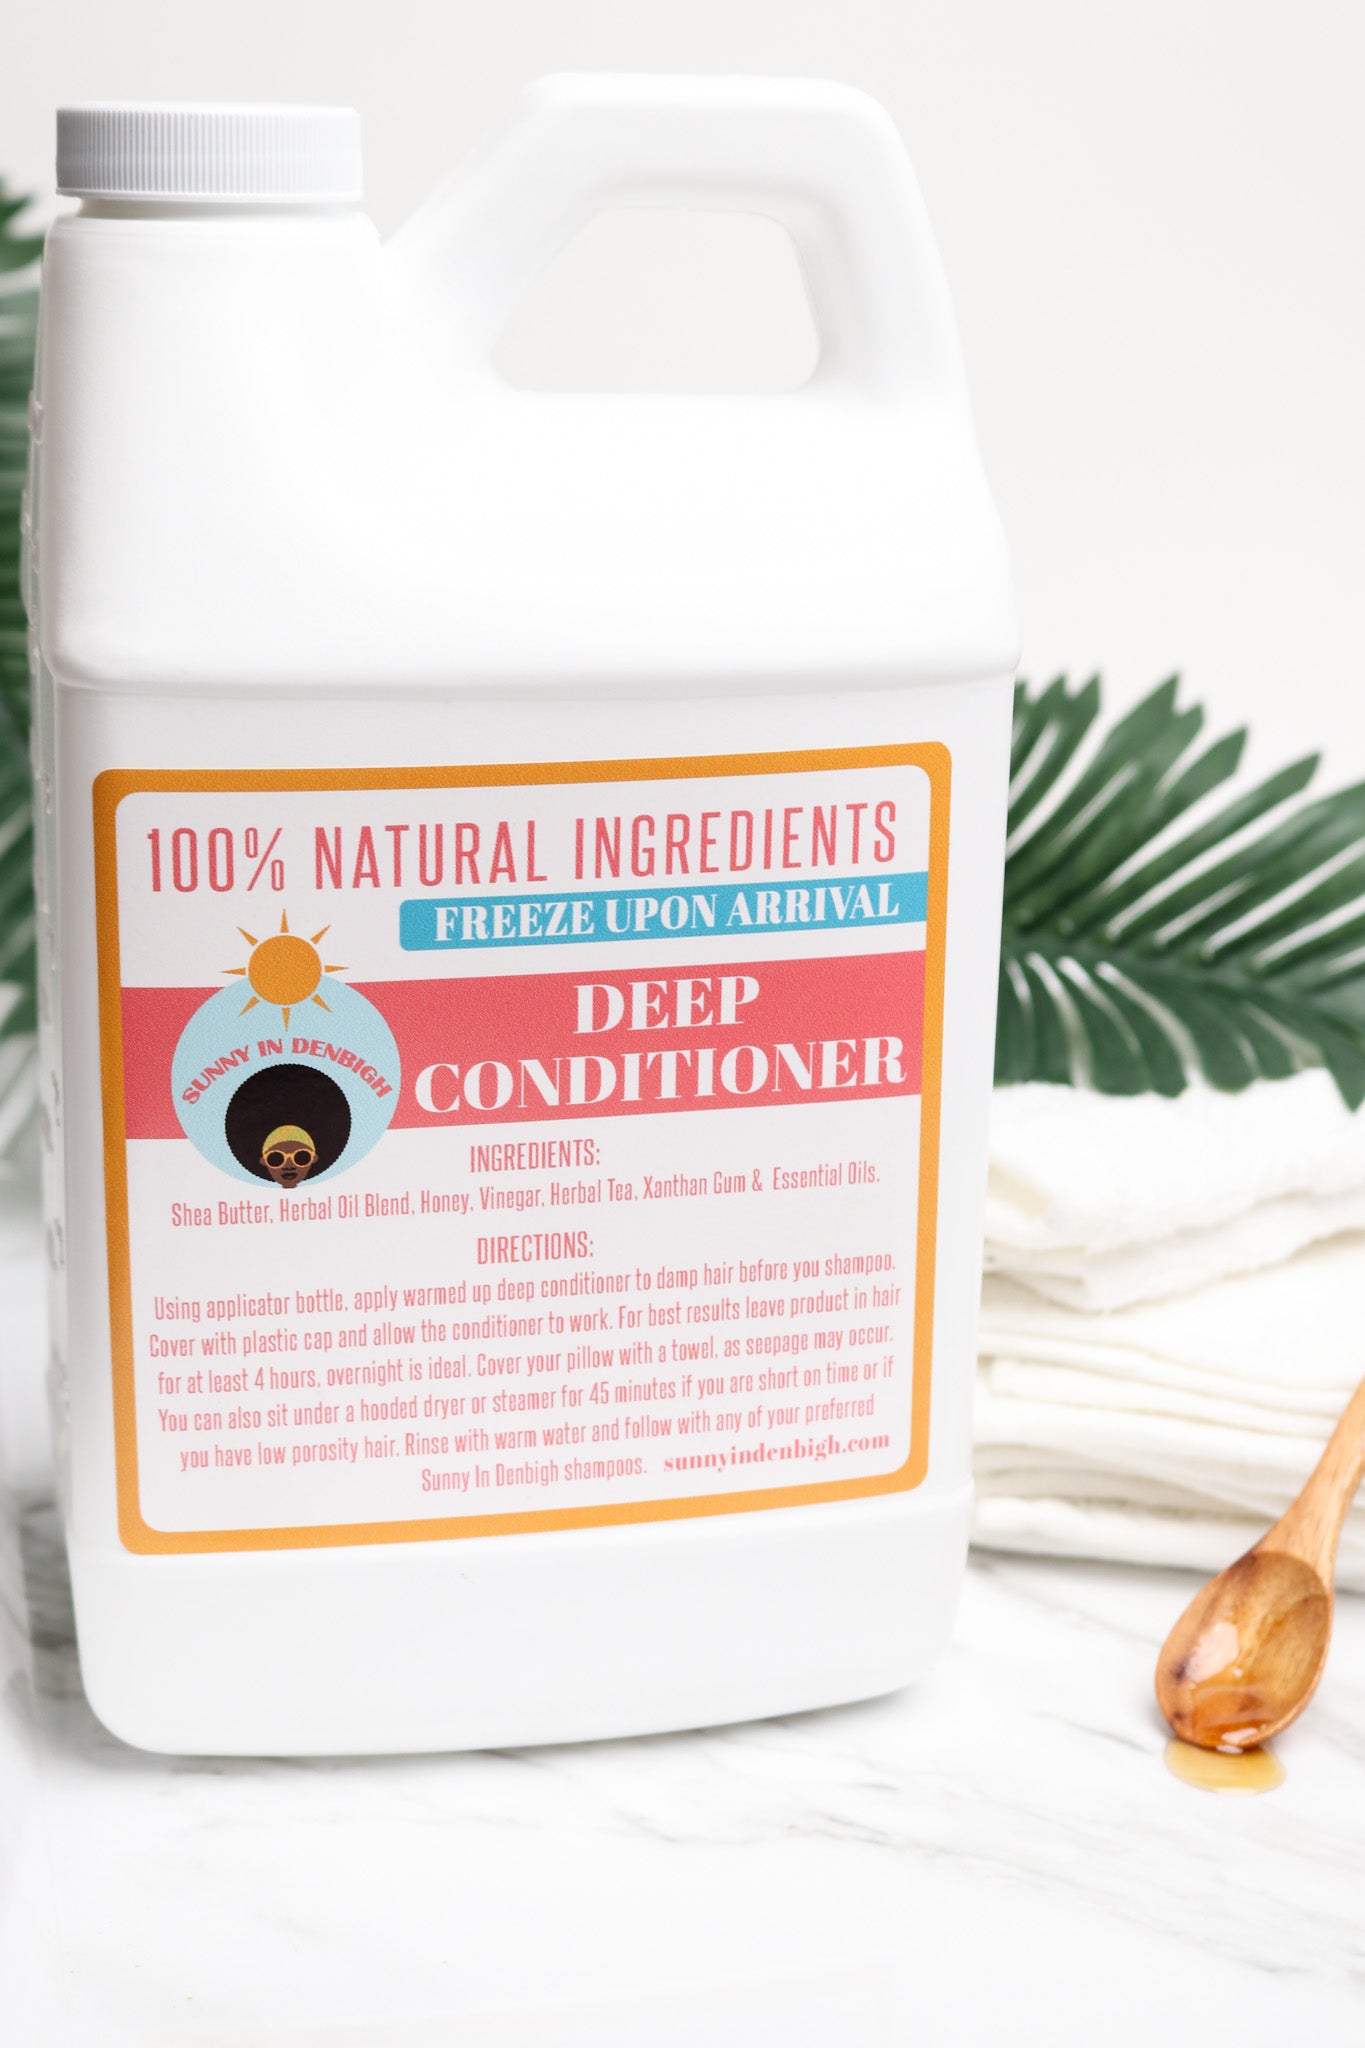 Sunny In Denbigh Overnight Deep Conditioner is the Holy Grail of all conditioners! Like seriously, it’s the star of the show. We describe it as pure love! No matter the current condition of your hair, our deep conditioner will help improve the health and texture of your hair. Made with all natural ingredients, it nourishes and repairs the hair from the root to the tip.